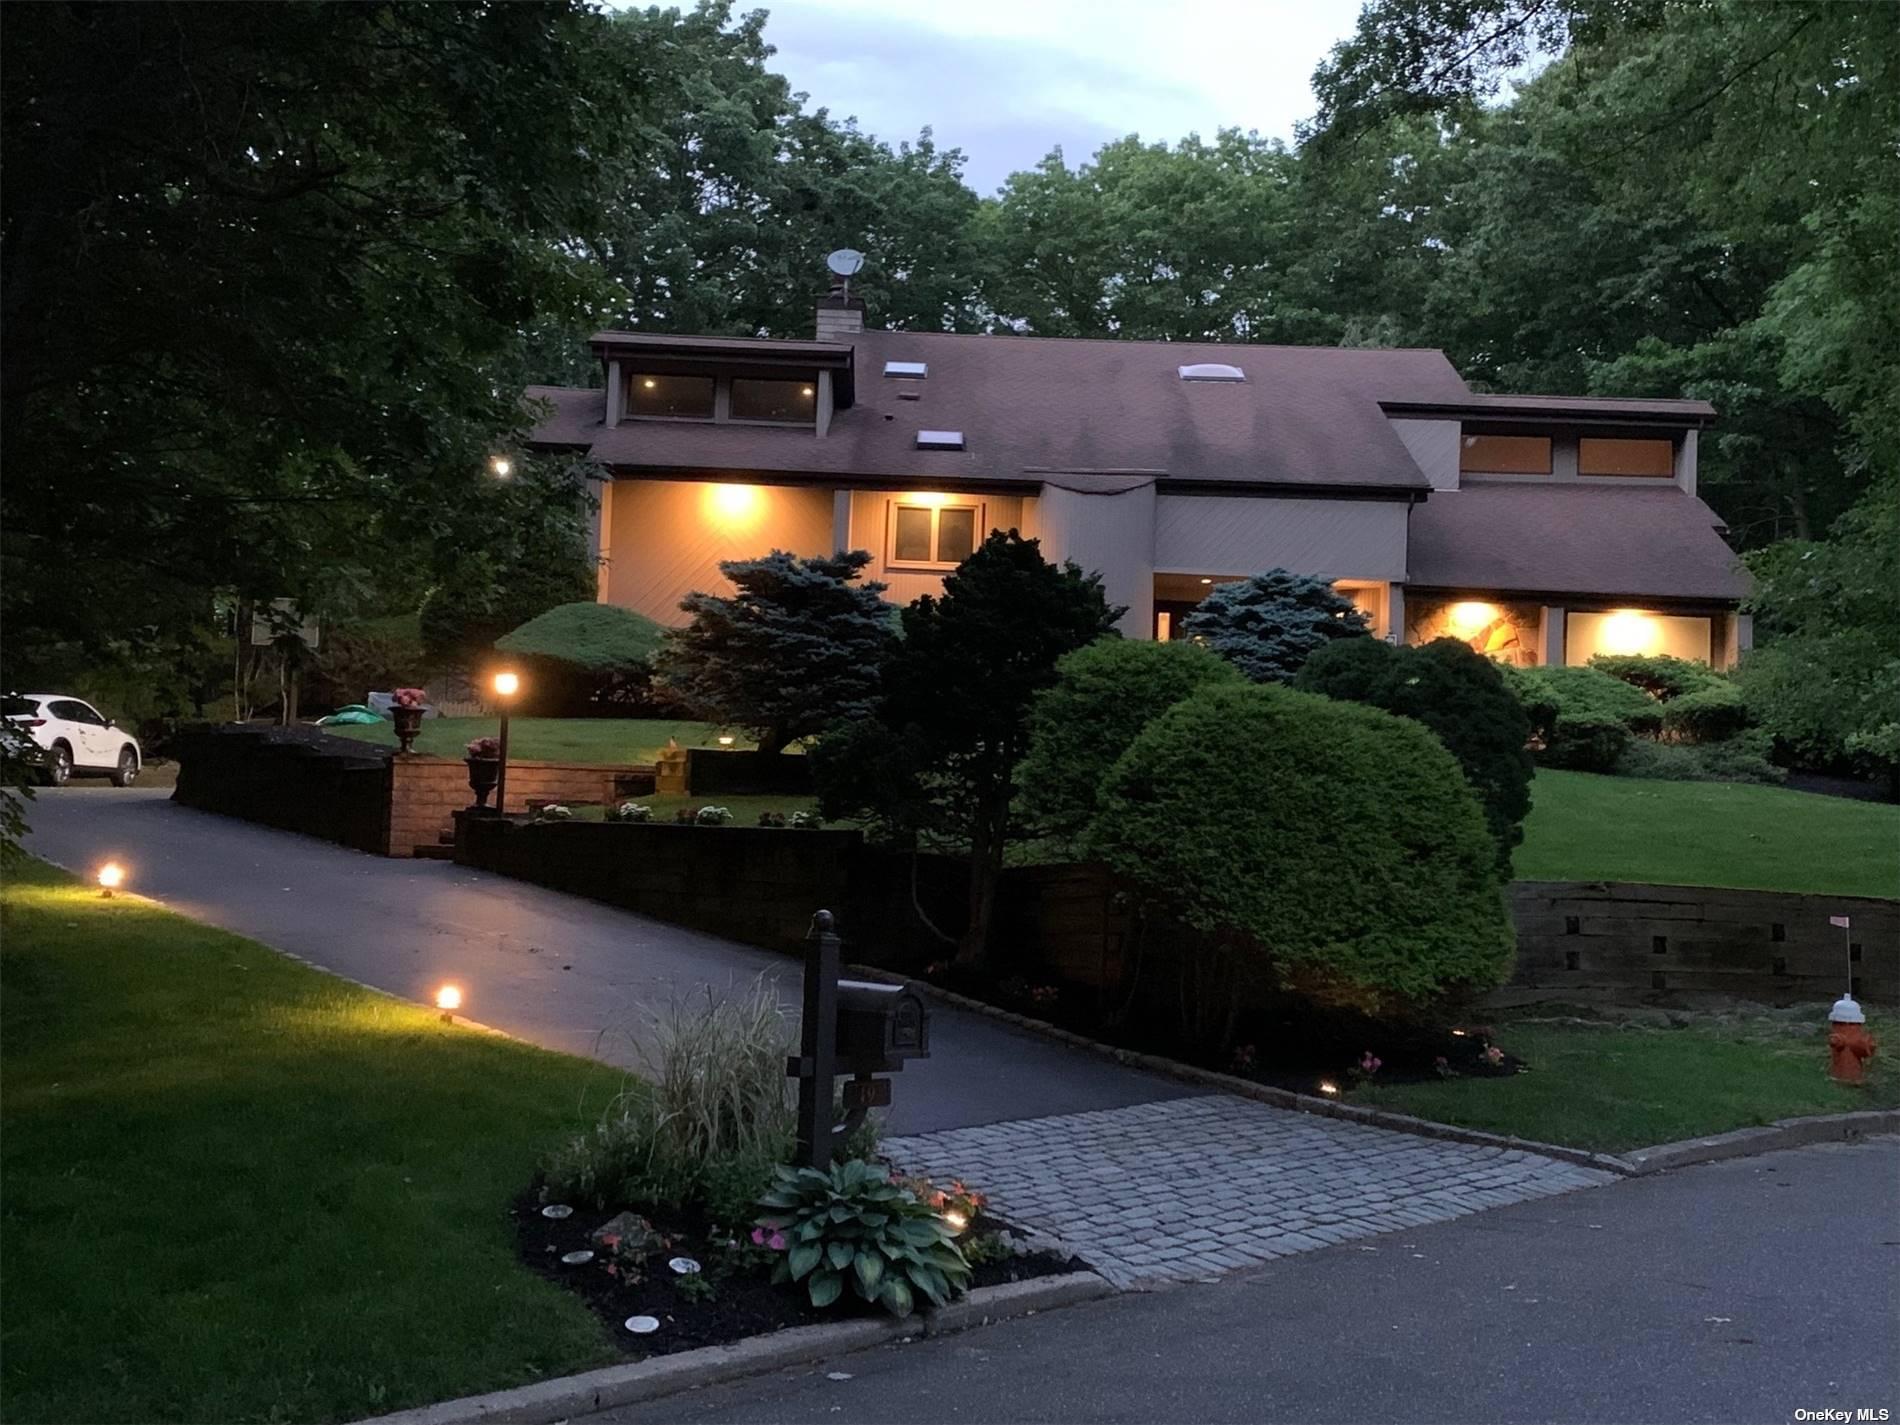 19 Brothers Court in Long Island, Dix Hills, NY 11746